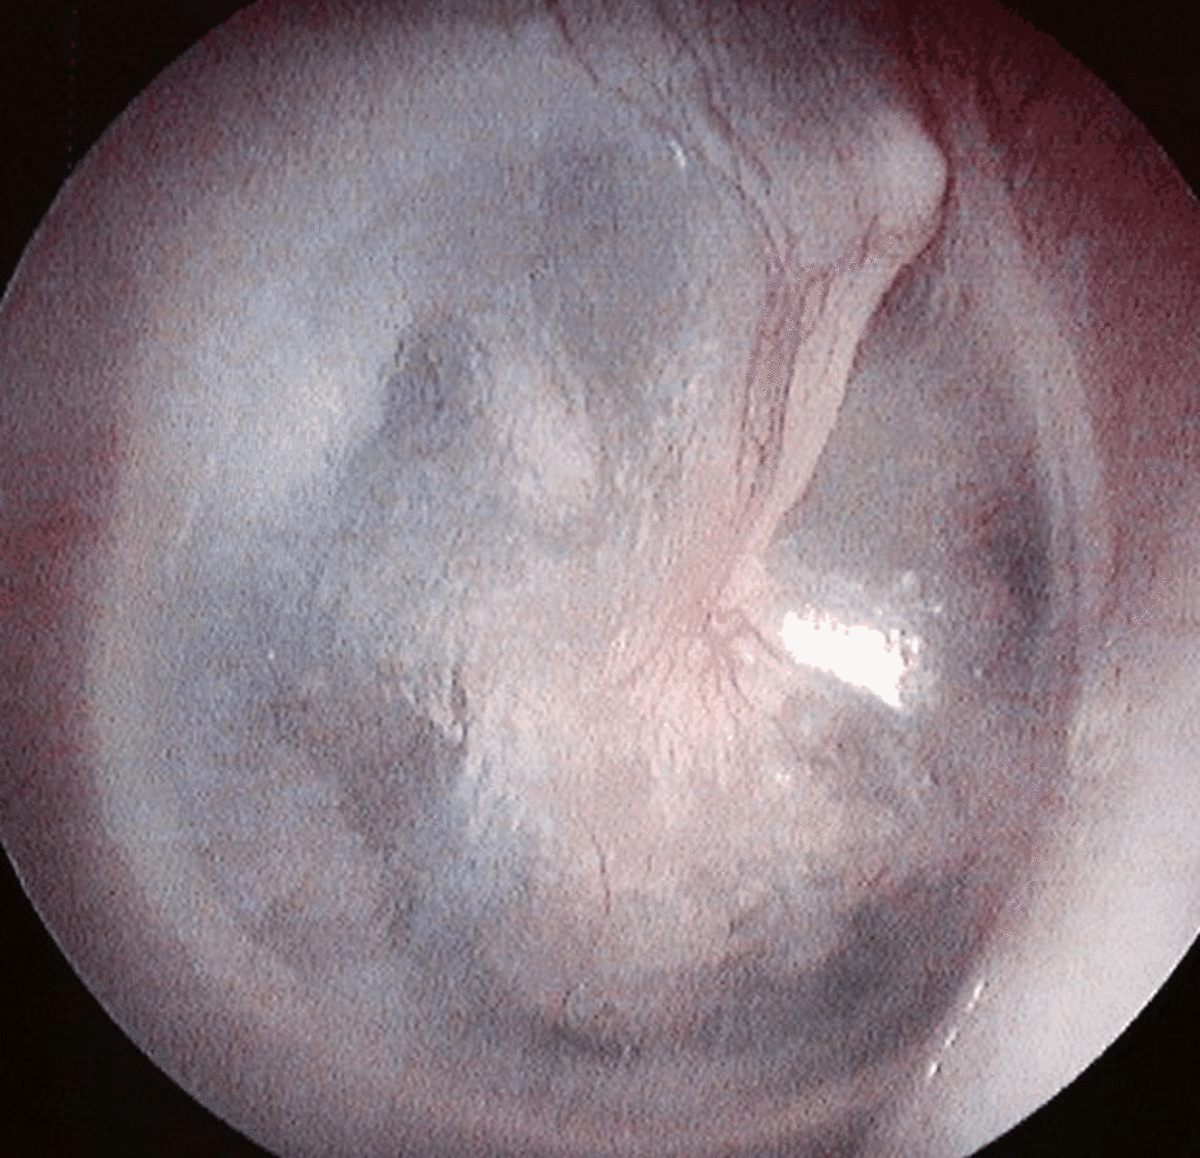 An example of an intact ear drum.